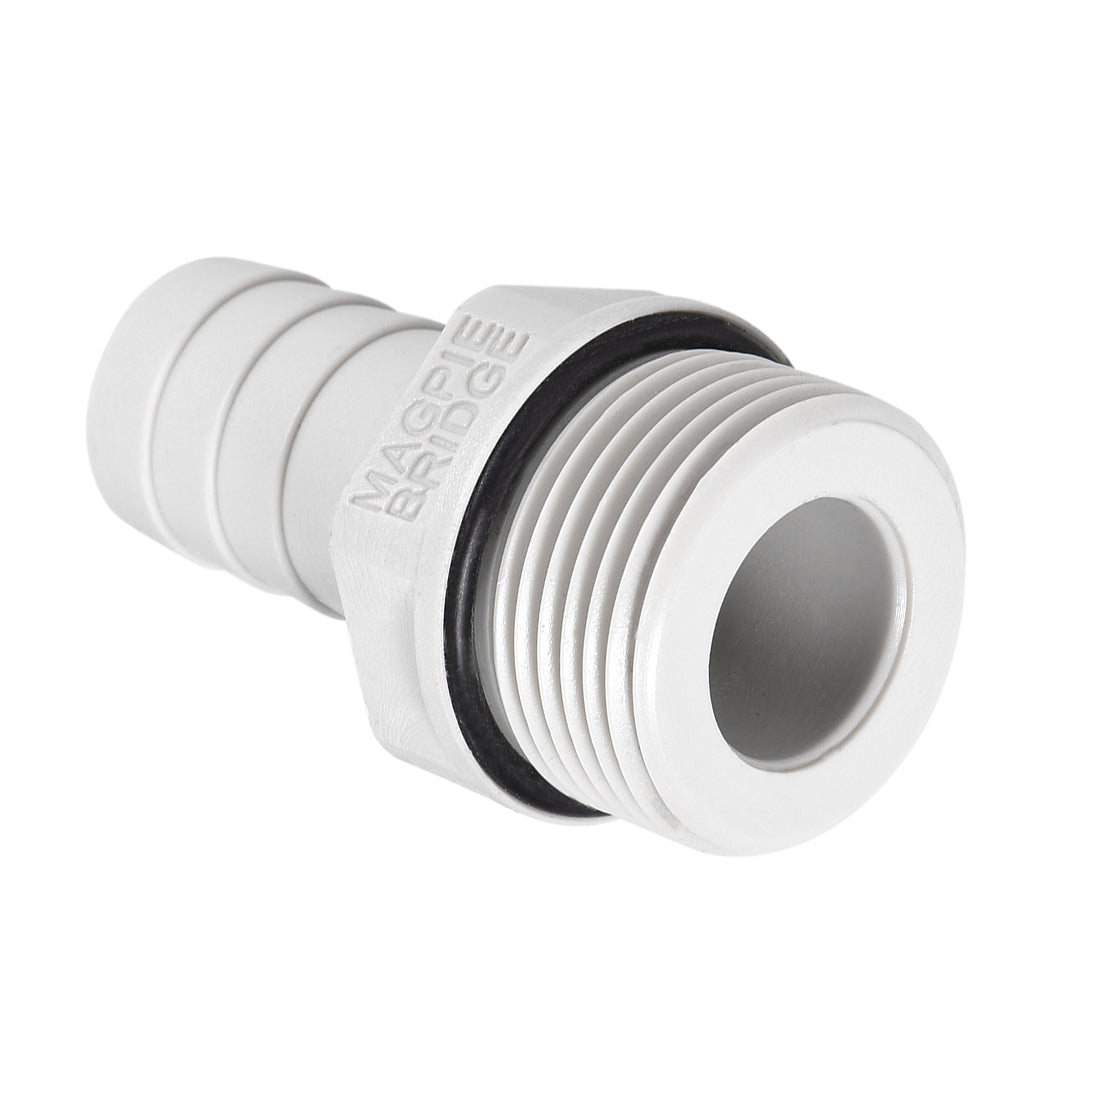 Uxcell Uxcell PVC Tube Fitting, Adapter, Barb Hose Connector, Gray, 10mm (25/64" )Barbed x G3/8 Male, 6pcs